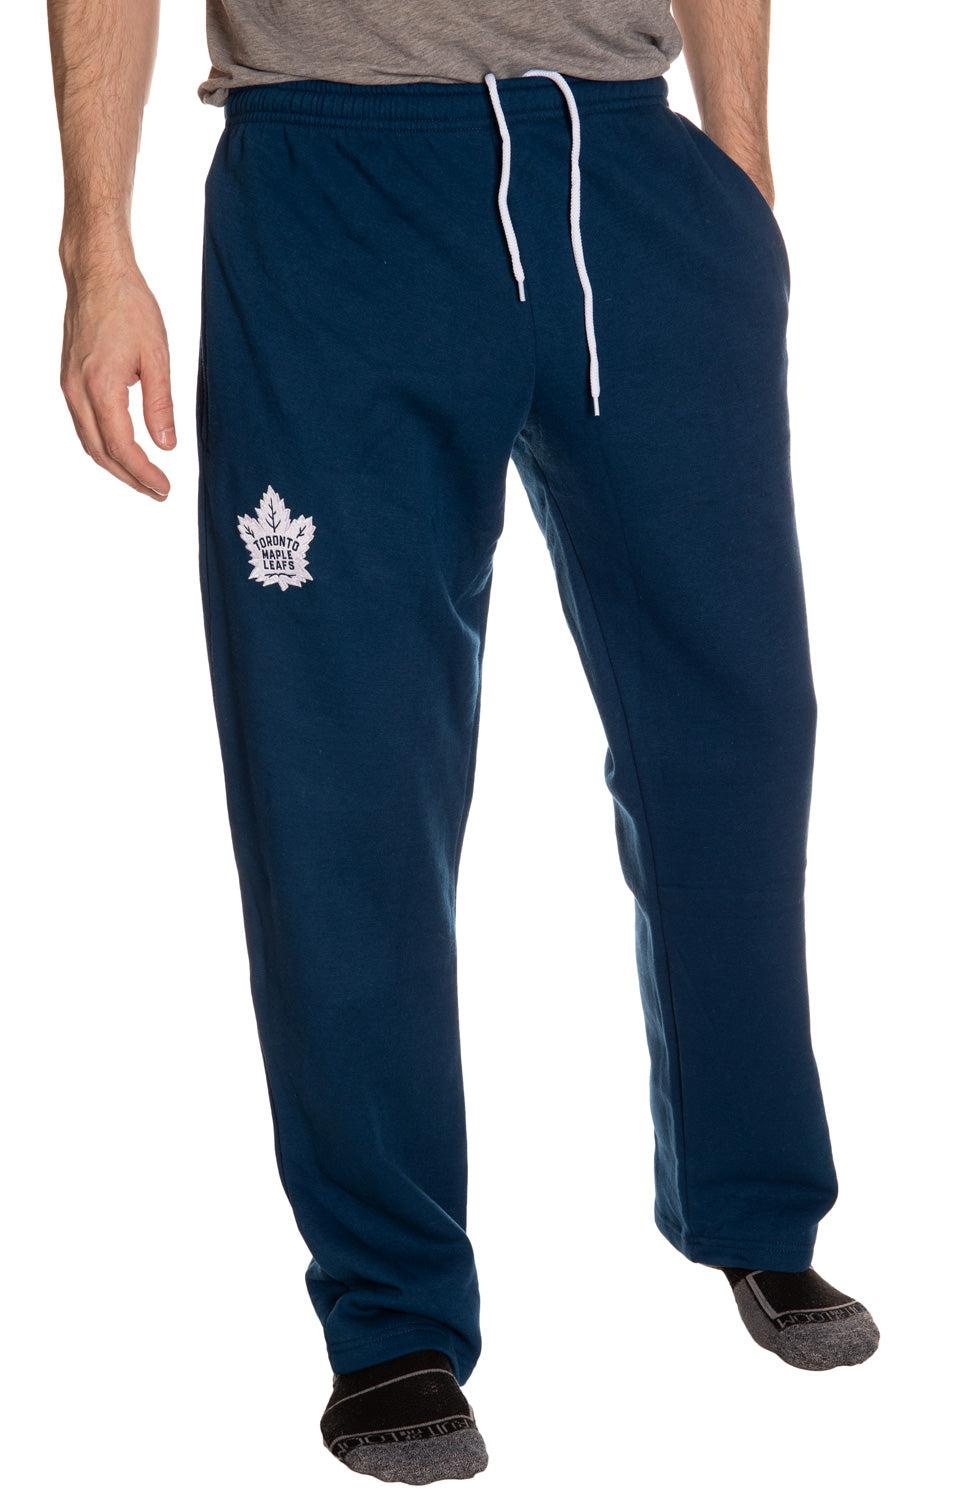 Toronto Maple Leafs Official NHL Sweatpants